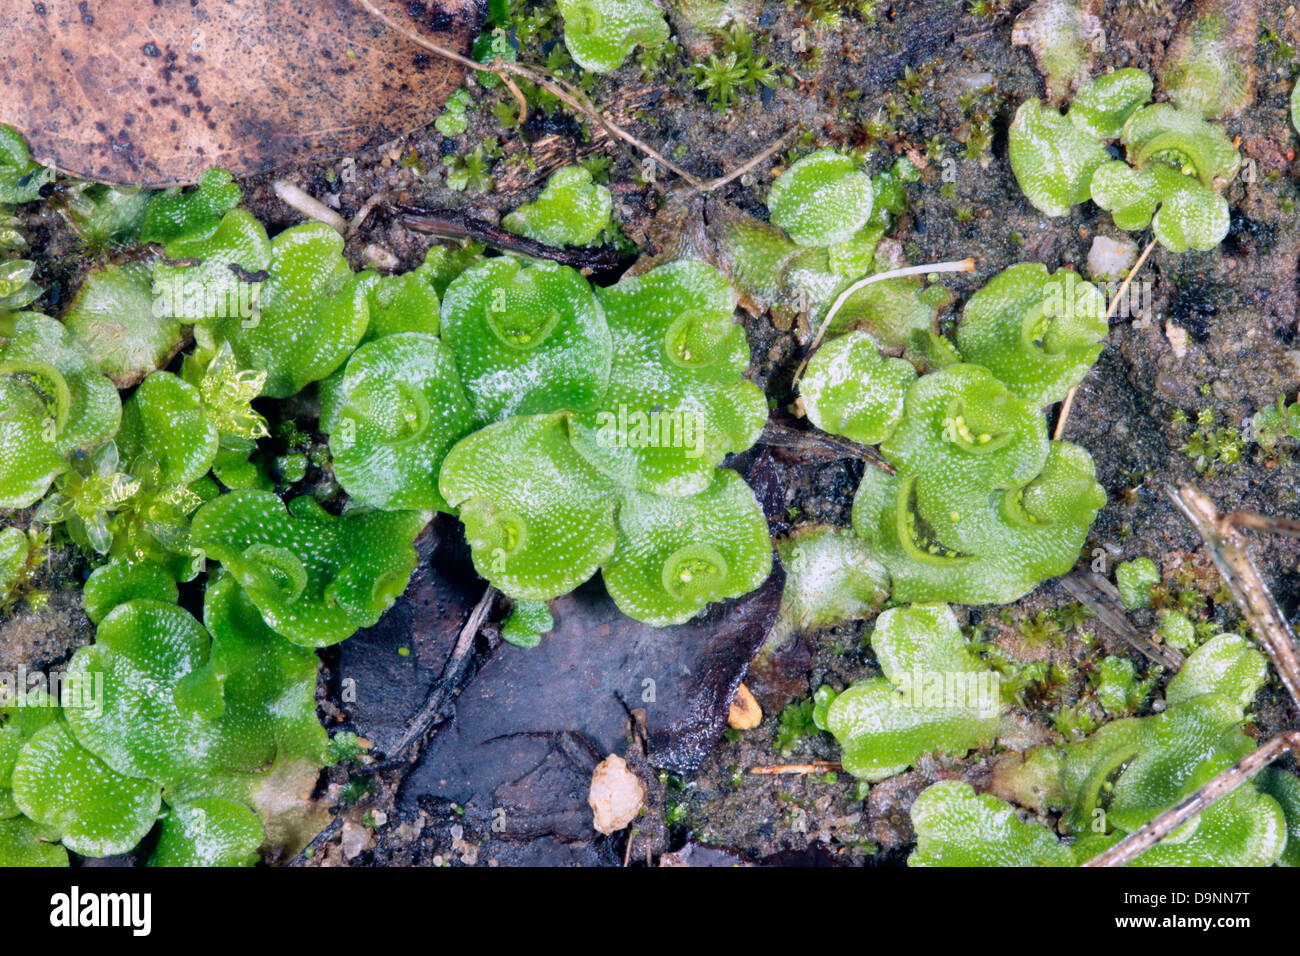 Close-up of Thallose Liverwort  showing crescent-shaped gemmae cups with gemmae inside- Lunularia cruciata Stock Photo